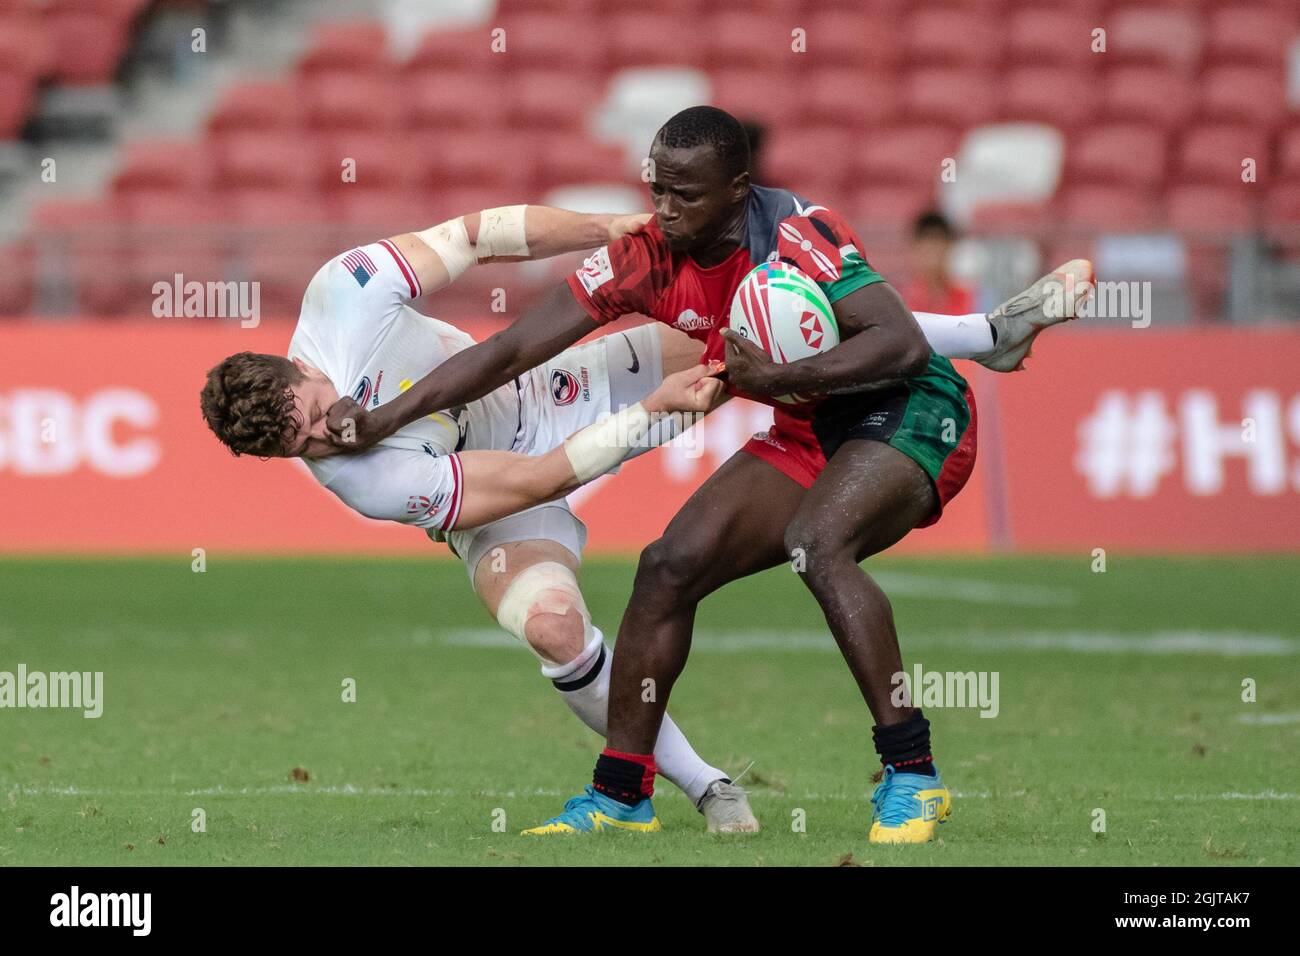 SINGAPORE-APRIL 13:Kenya 7s Team (red) plays against USA 7s team (white) during Day 1 of HSBC World Rugby Singapore Sevens on April 13, 2019 at National Stadium in Singapore Stock Photo